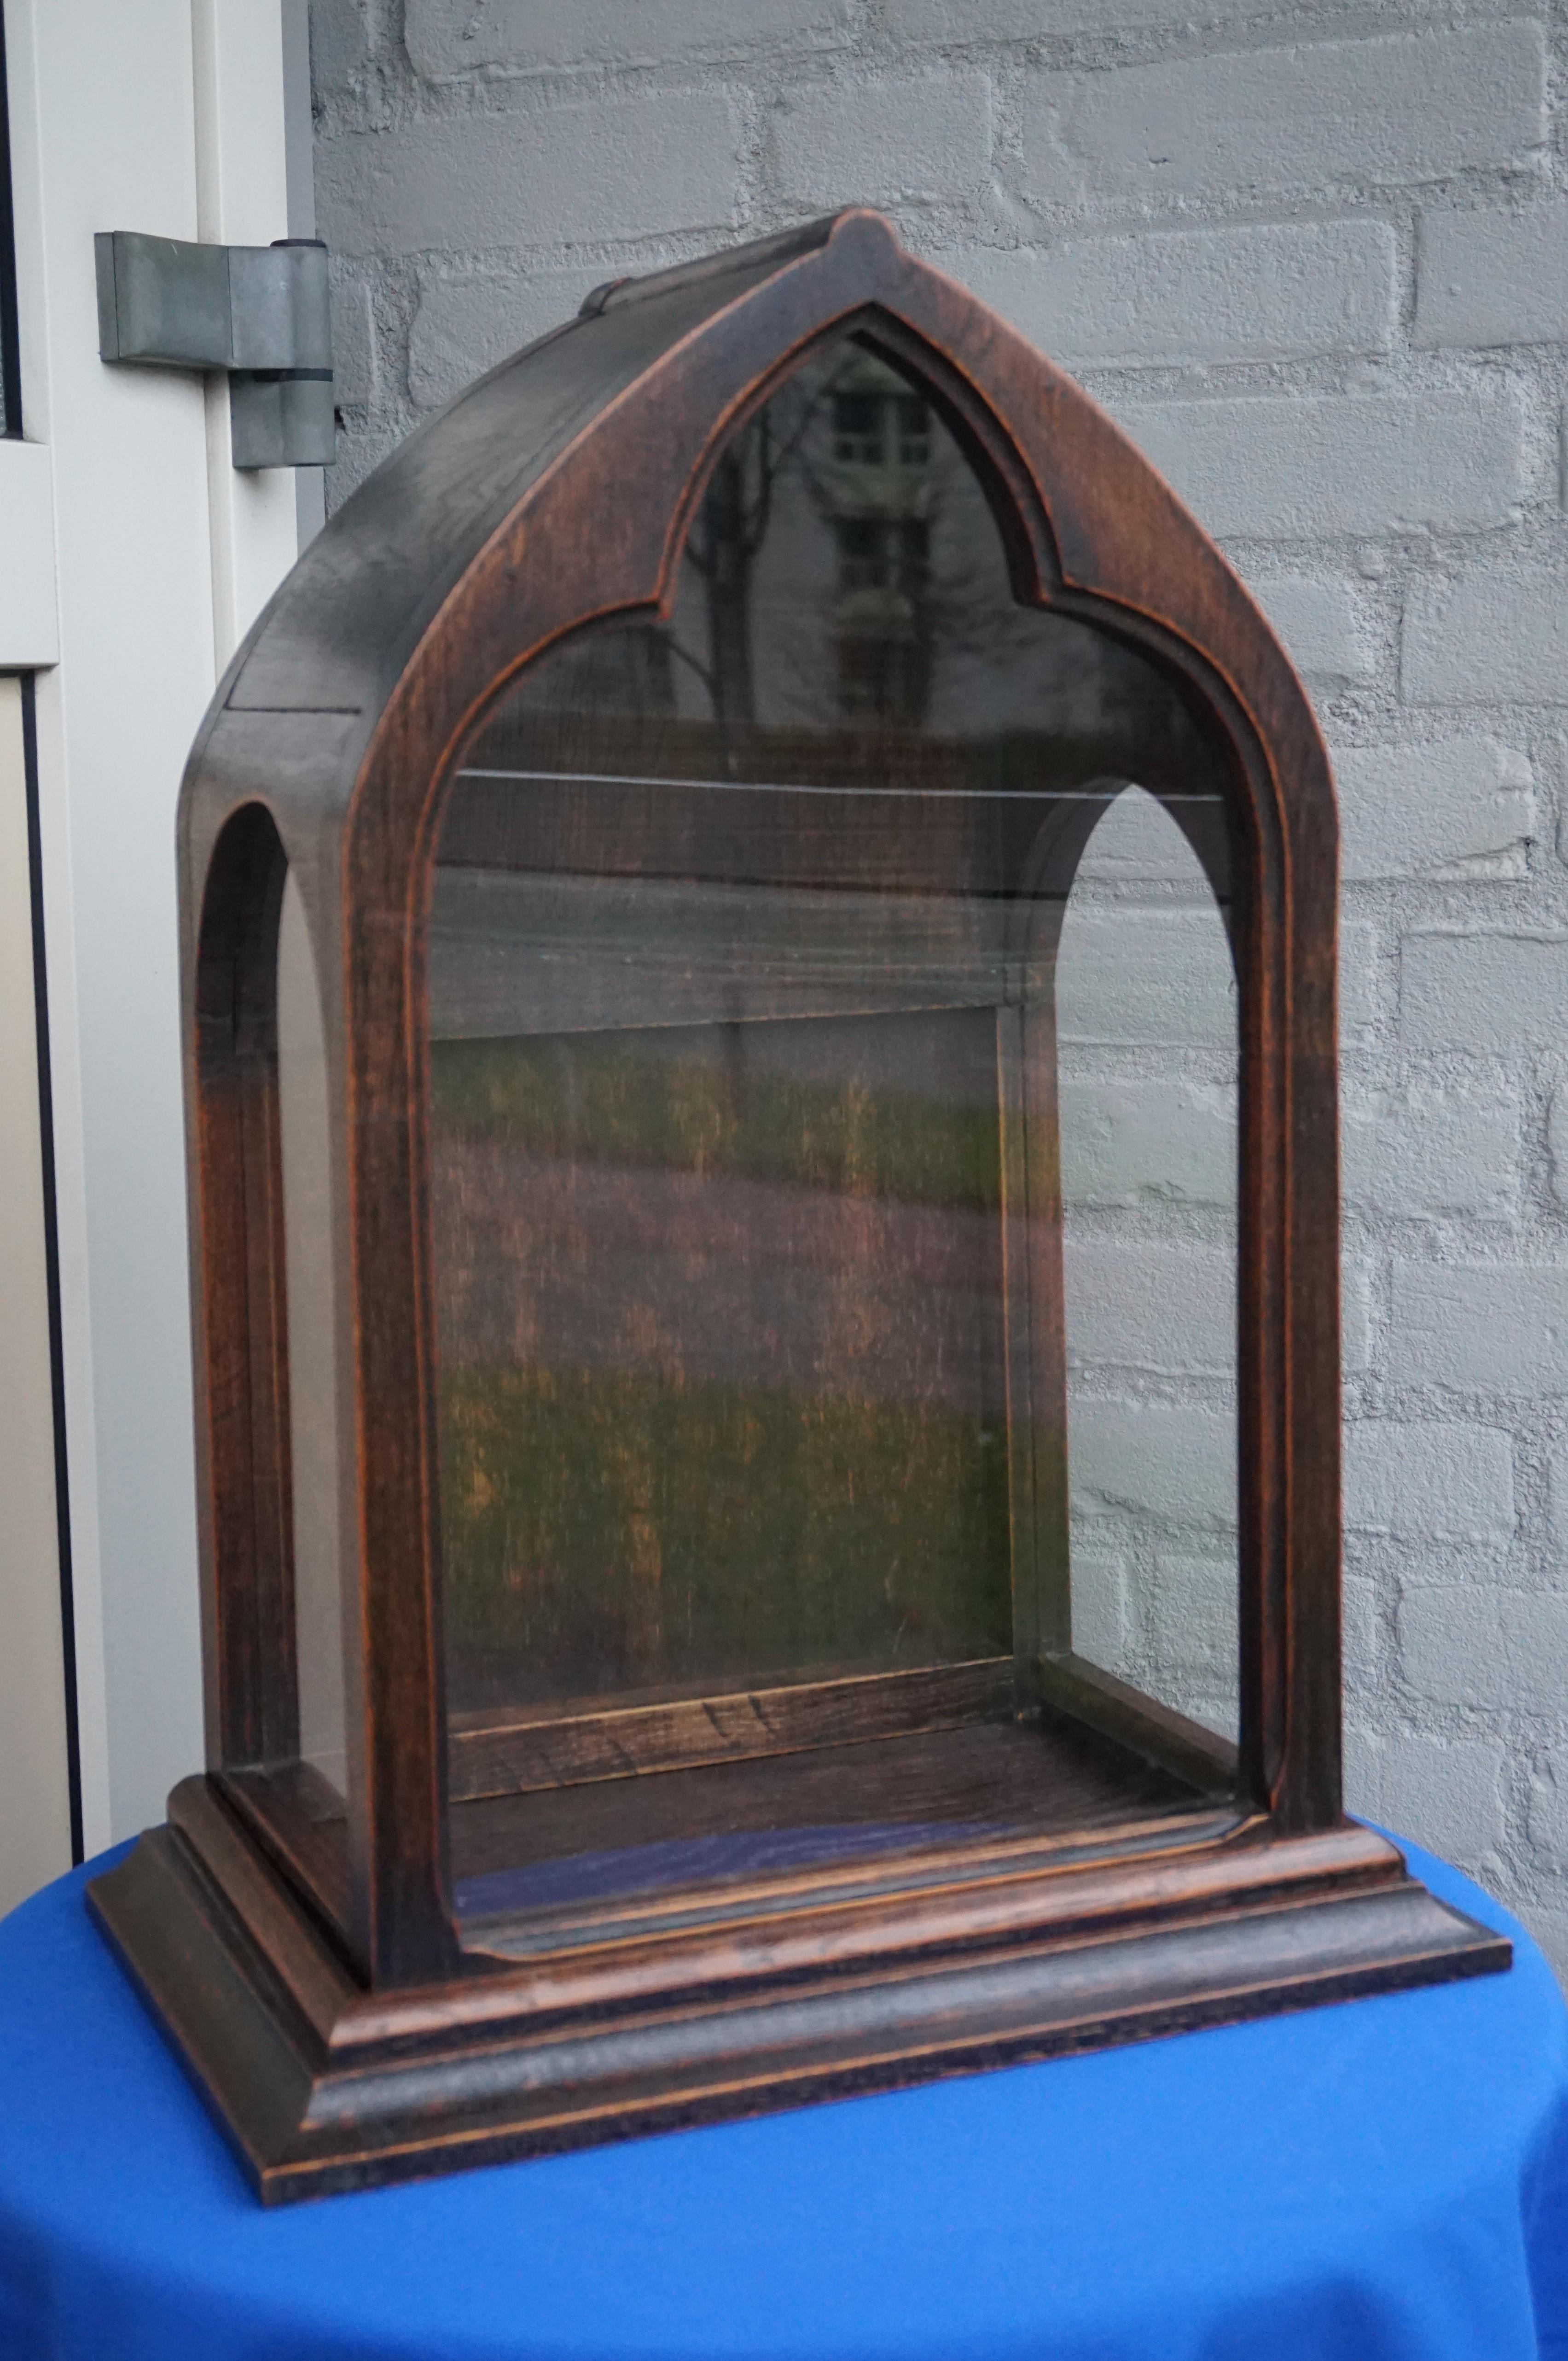 Handcrafted Gothic chapel / church statuette cabinet.

If you own an antique church sculpture or a bronze Gothic clock then this could be the perfect dome / chapel for it. This handcrafted oak cabinet is in the best condition possible and you can